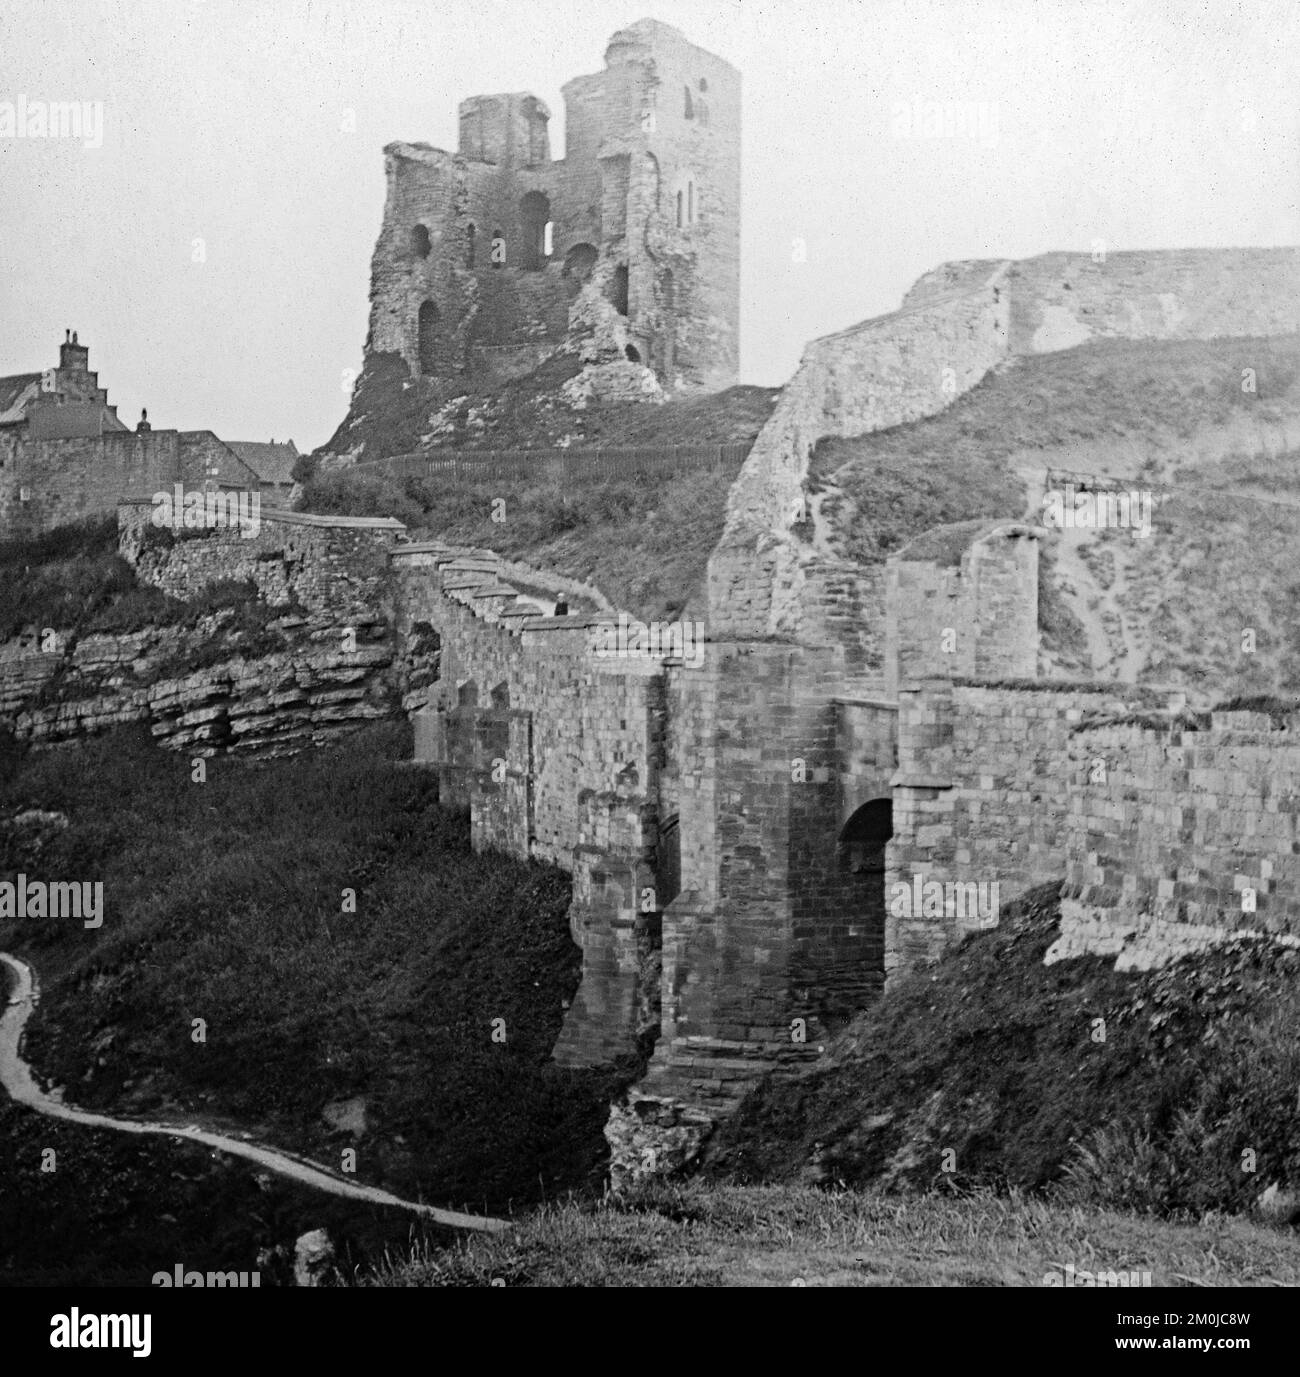 A vintage 1897 black and white photograph showing Scarborough Castle in England. Stock Photo